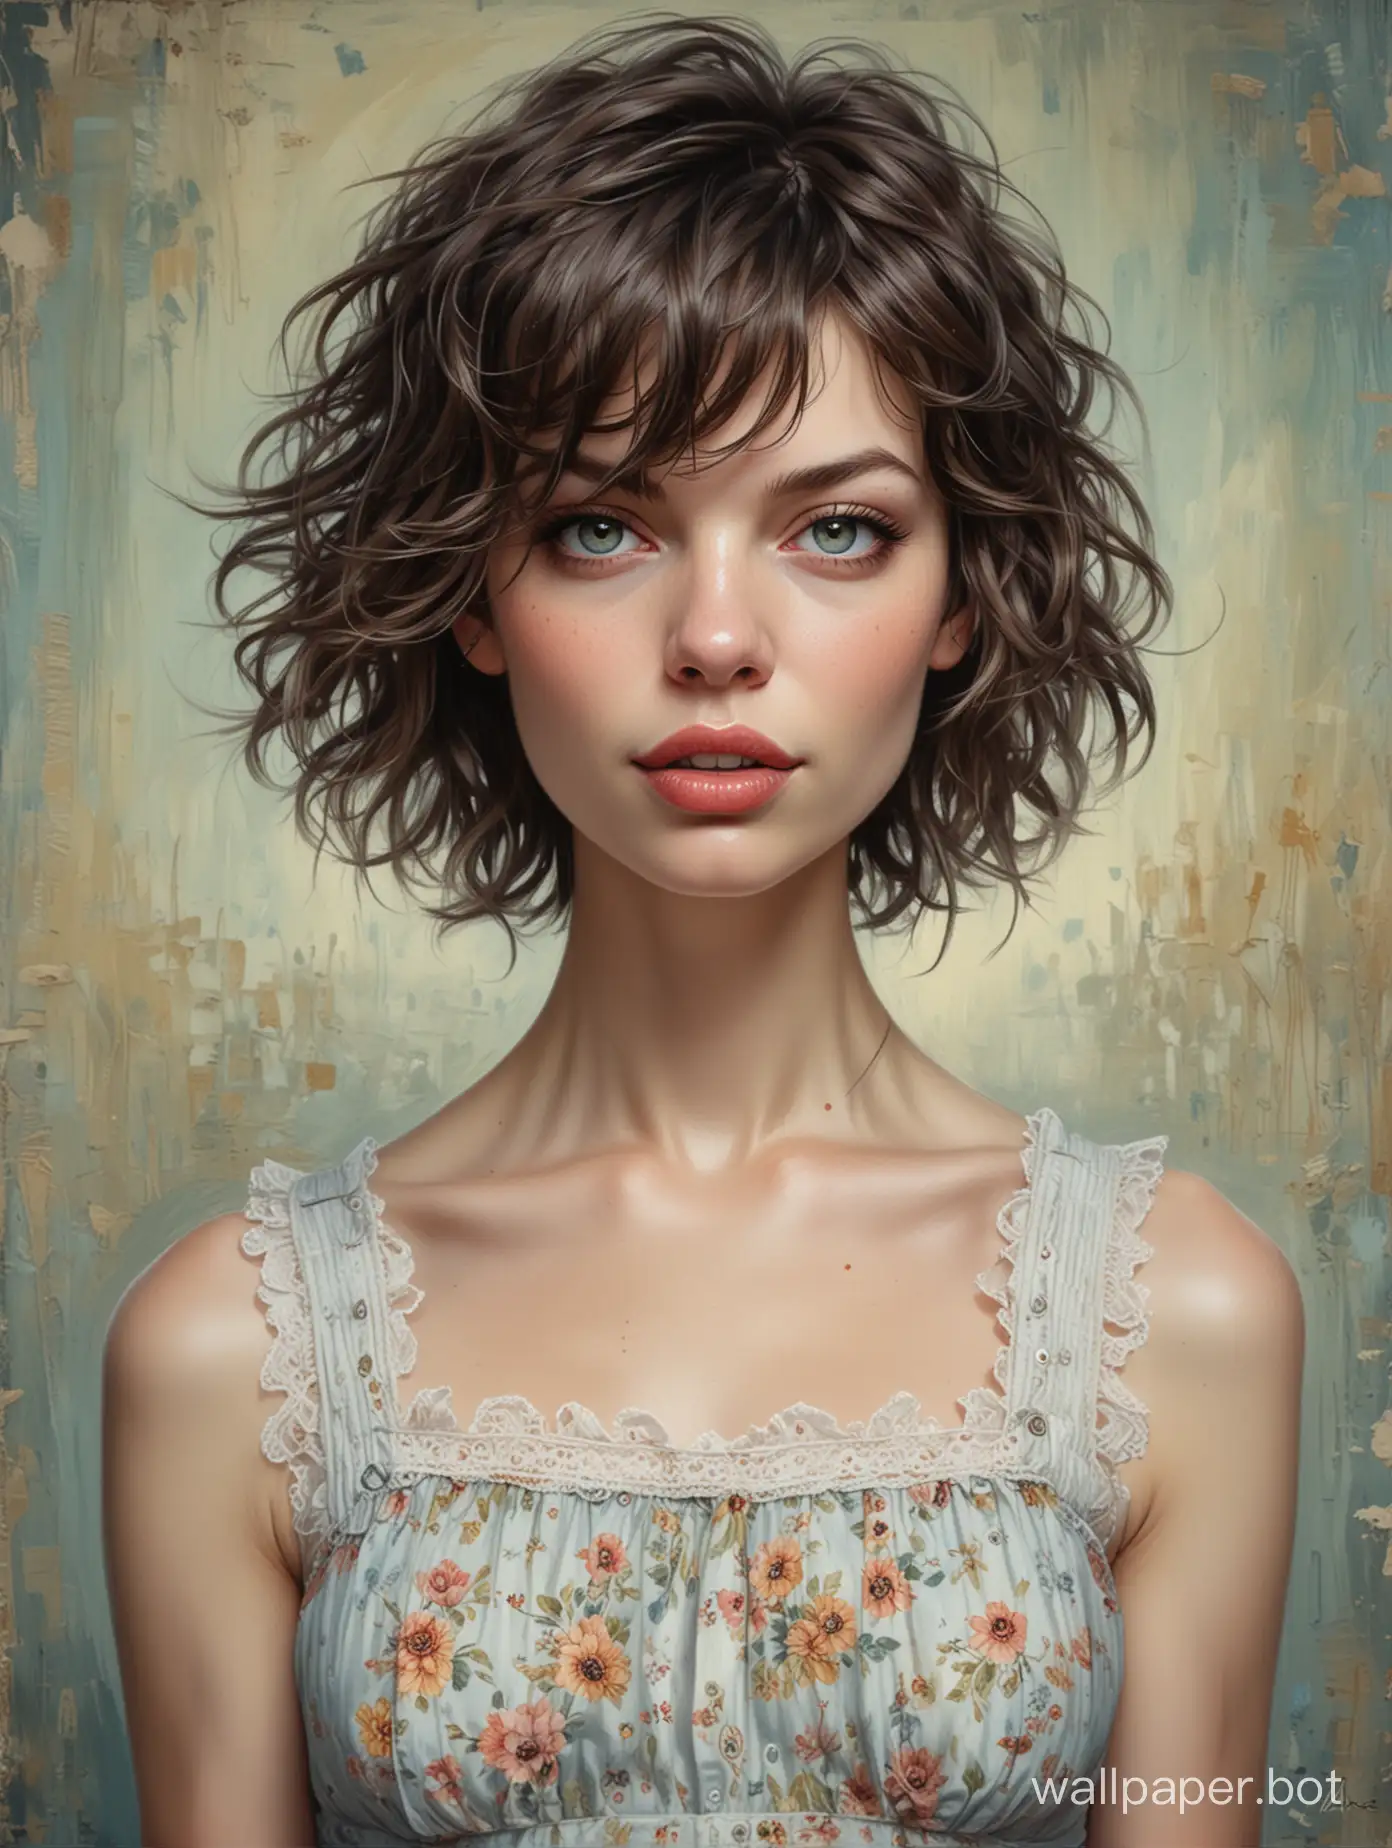 Oil painting with Impasto texture, in the style of Tim Burton comics (Mila Jovovich- dreamy girl, expressive eyes, in a sundress, 60% height, intricate details), with Impasto texture, eccentric, surreal, super detailed, super clear and sharp , glossy. Olga Esther's style.